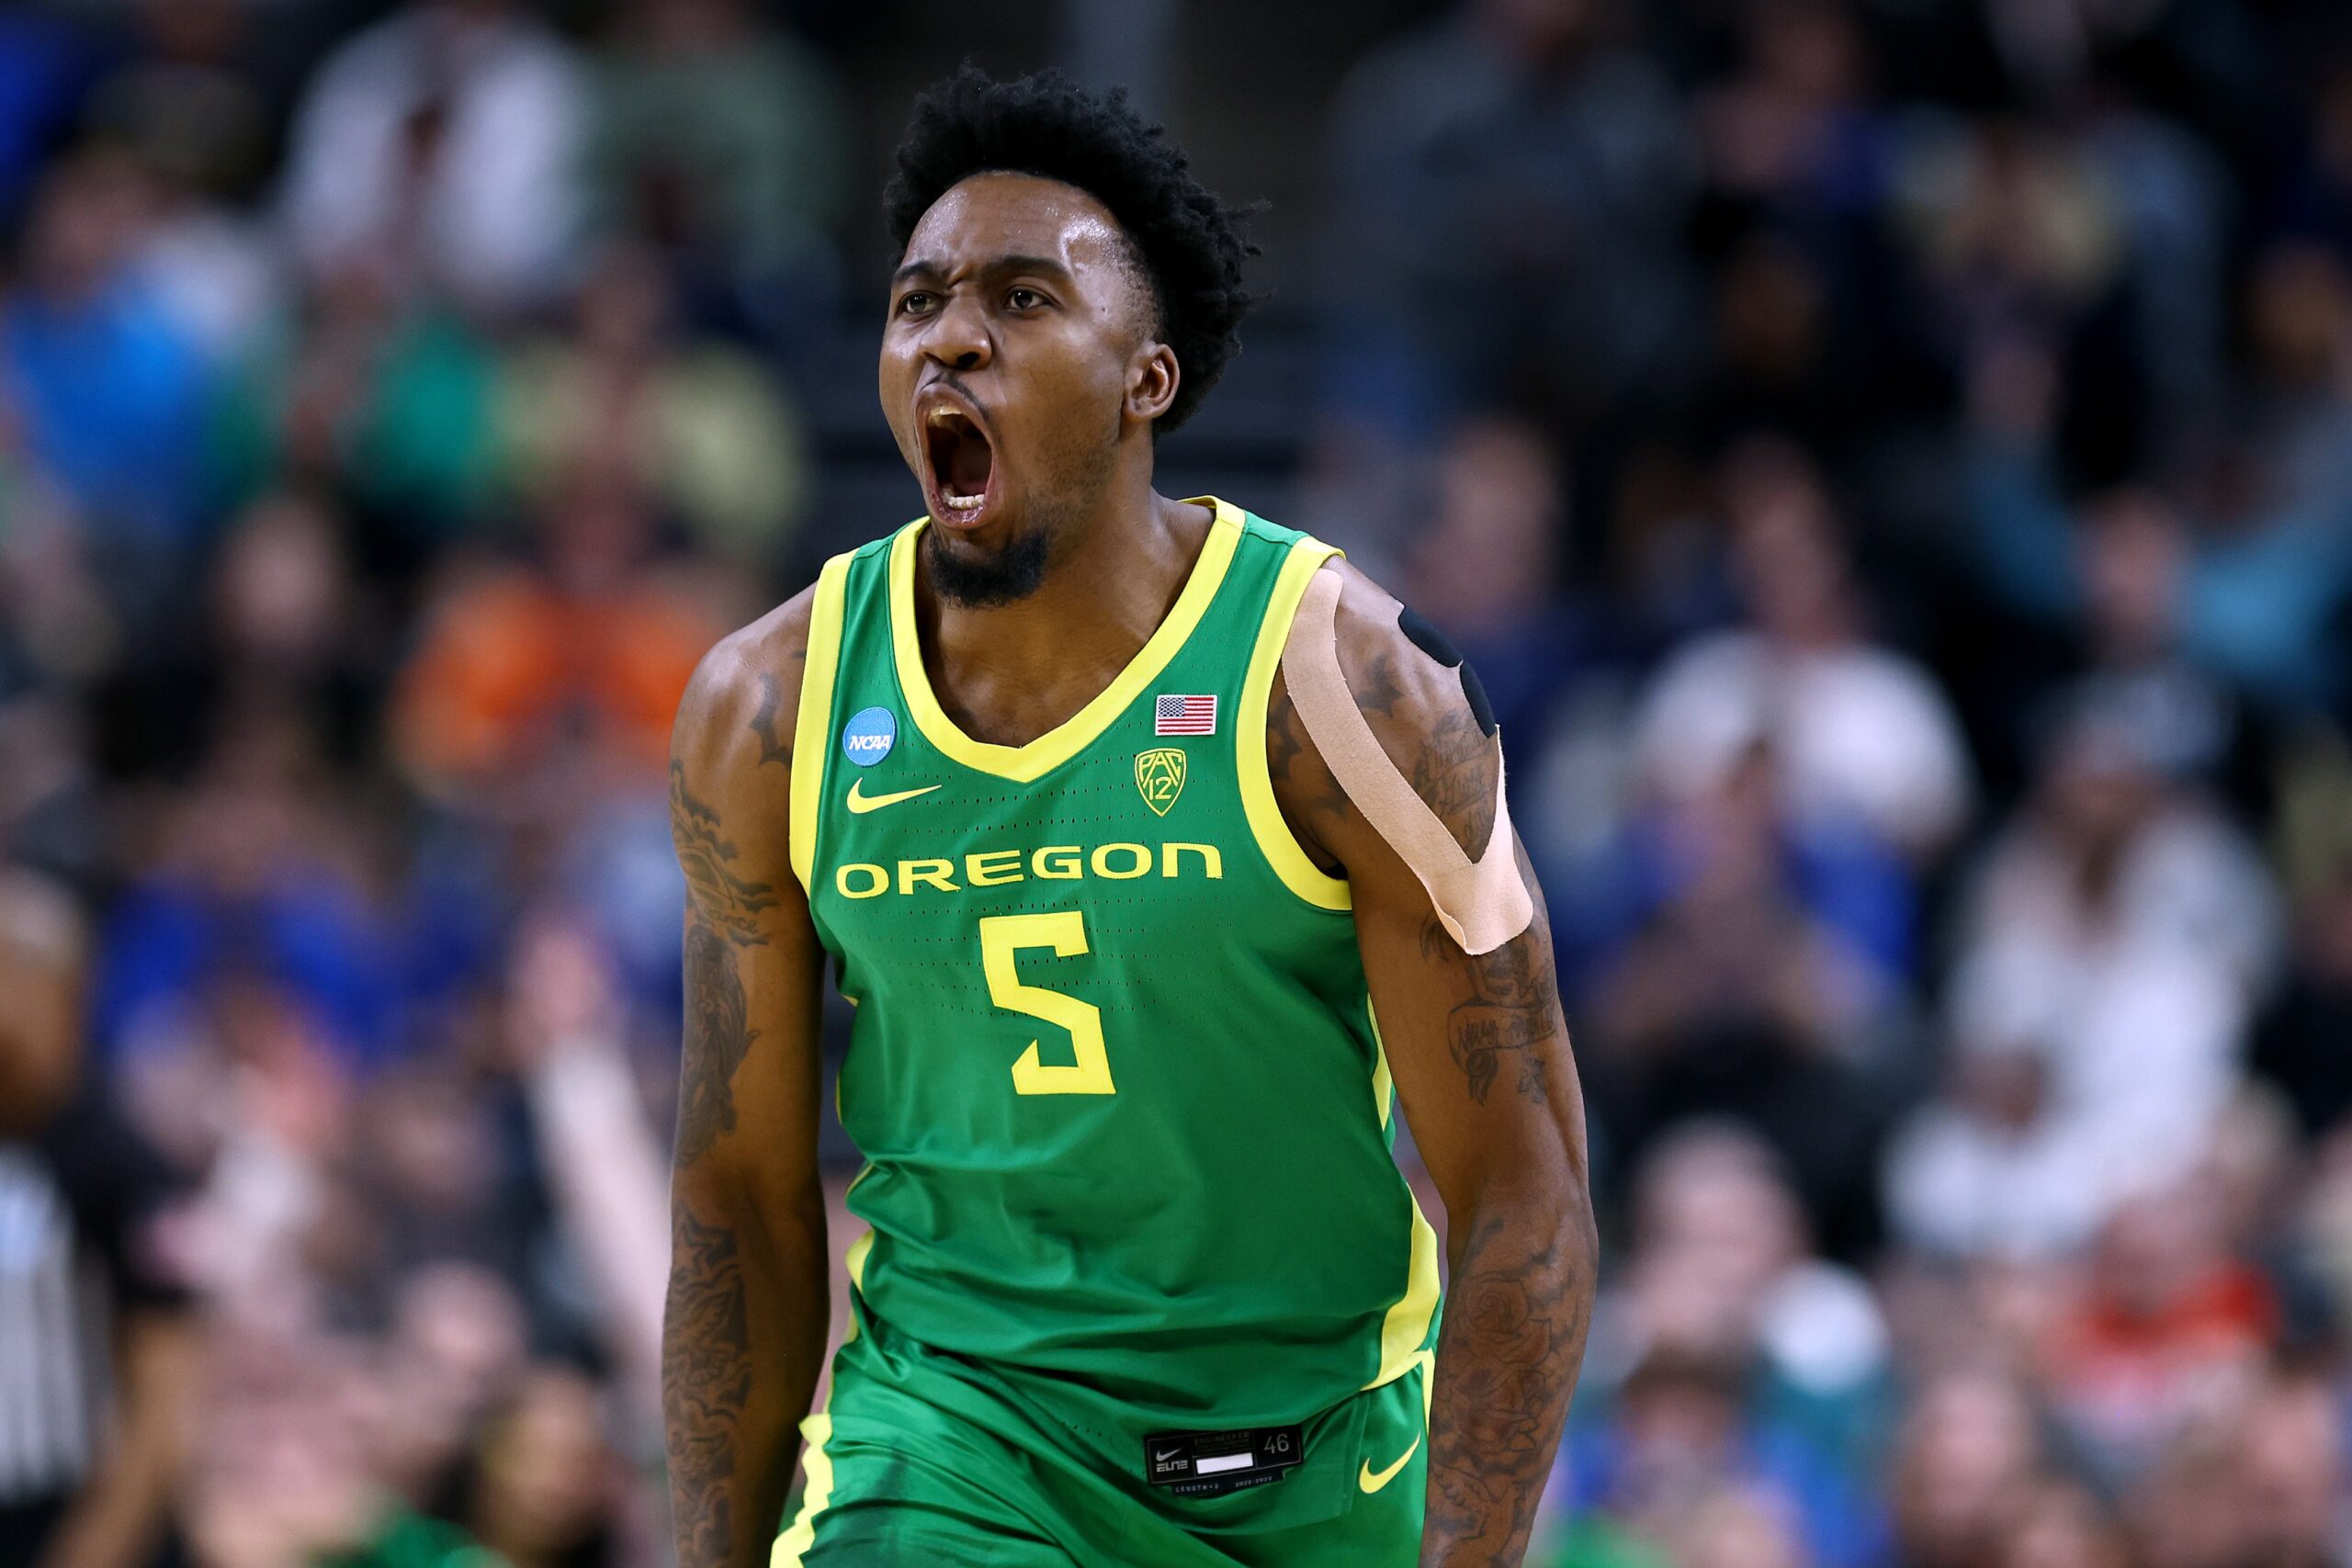 Jermaine Couisnard #5 of the Oregon Ducks reacts in the second half against the South Carolina Gamecocks in the first round of the NCAA Men's Basketball Tournament at PPG PAINTS Arena on March 21, 2024, in Pittsburgh, Pennsylvania.